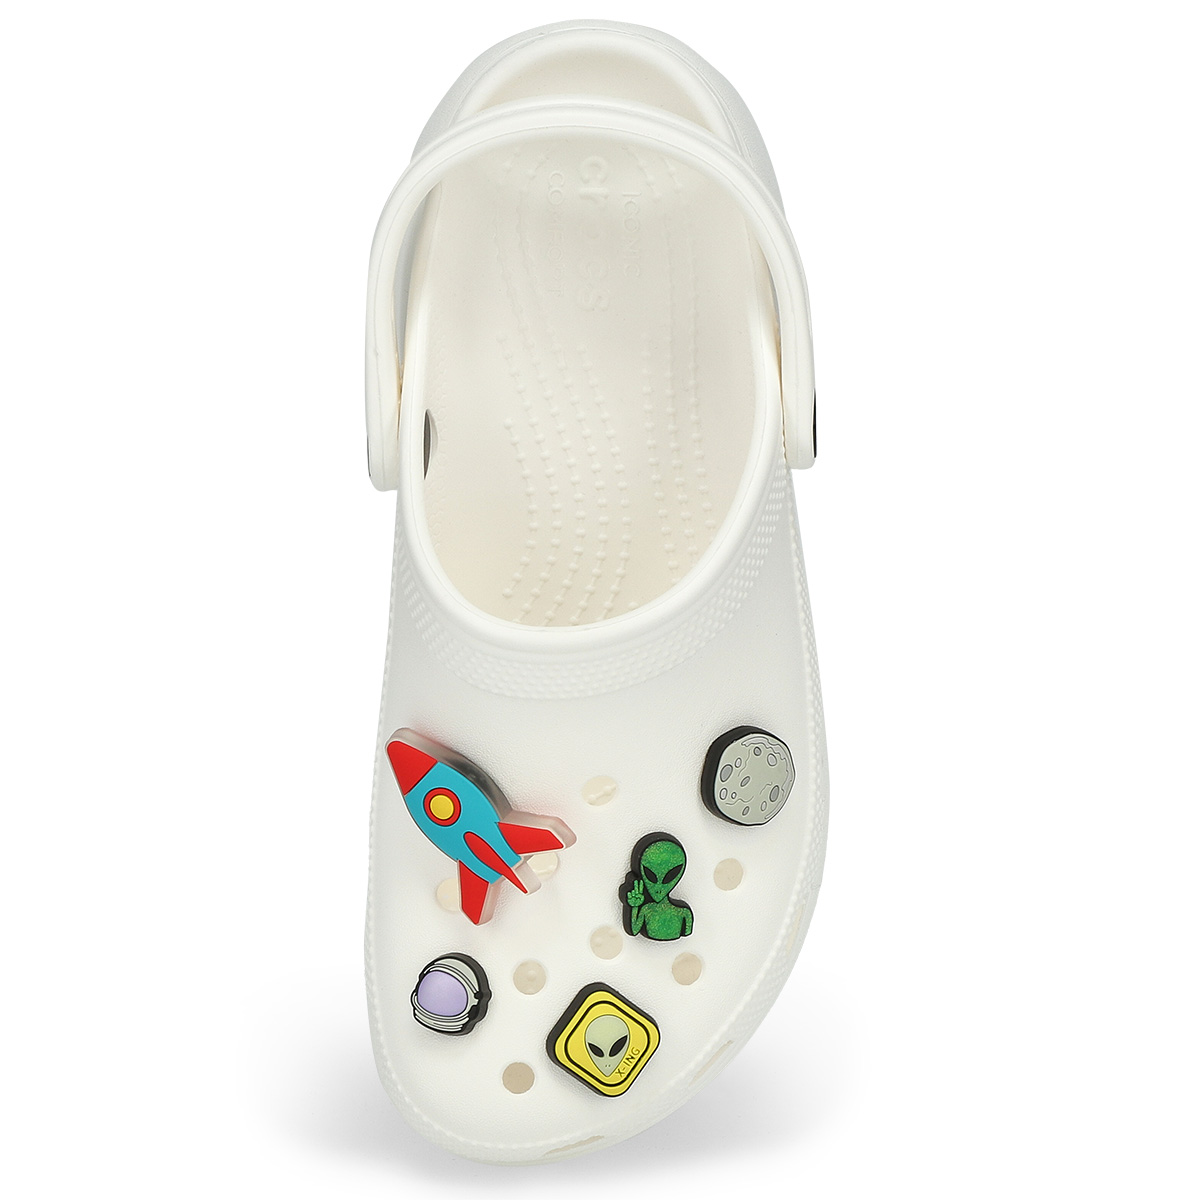 Crocs Jibbitz Outer Space - 5 pack | SoftMoc USA